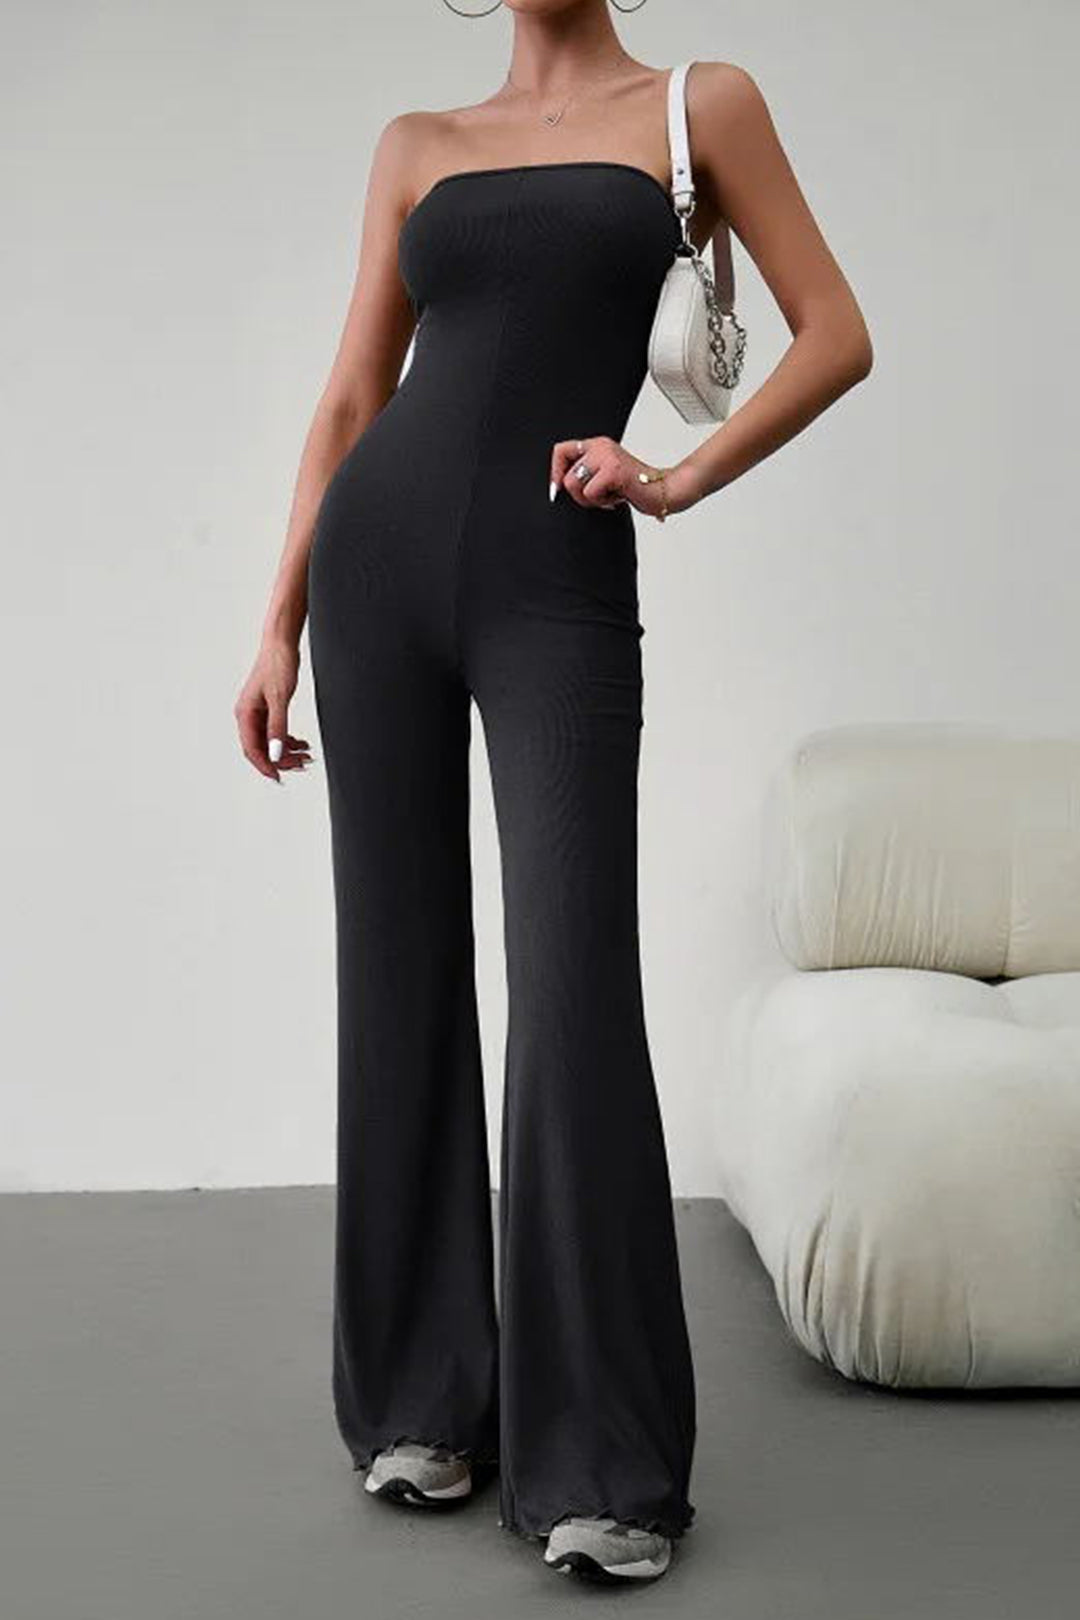 Braided Tie Backless Strapless Flared Jumpsuit